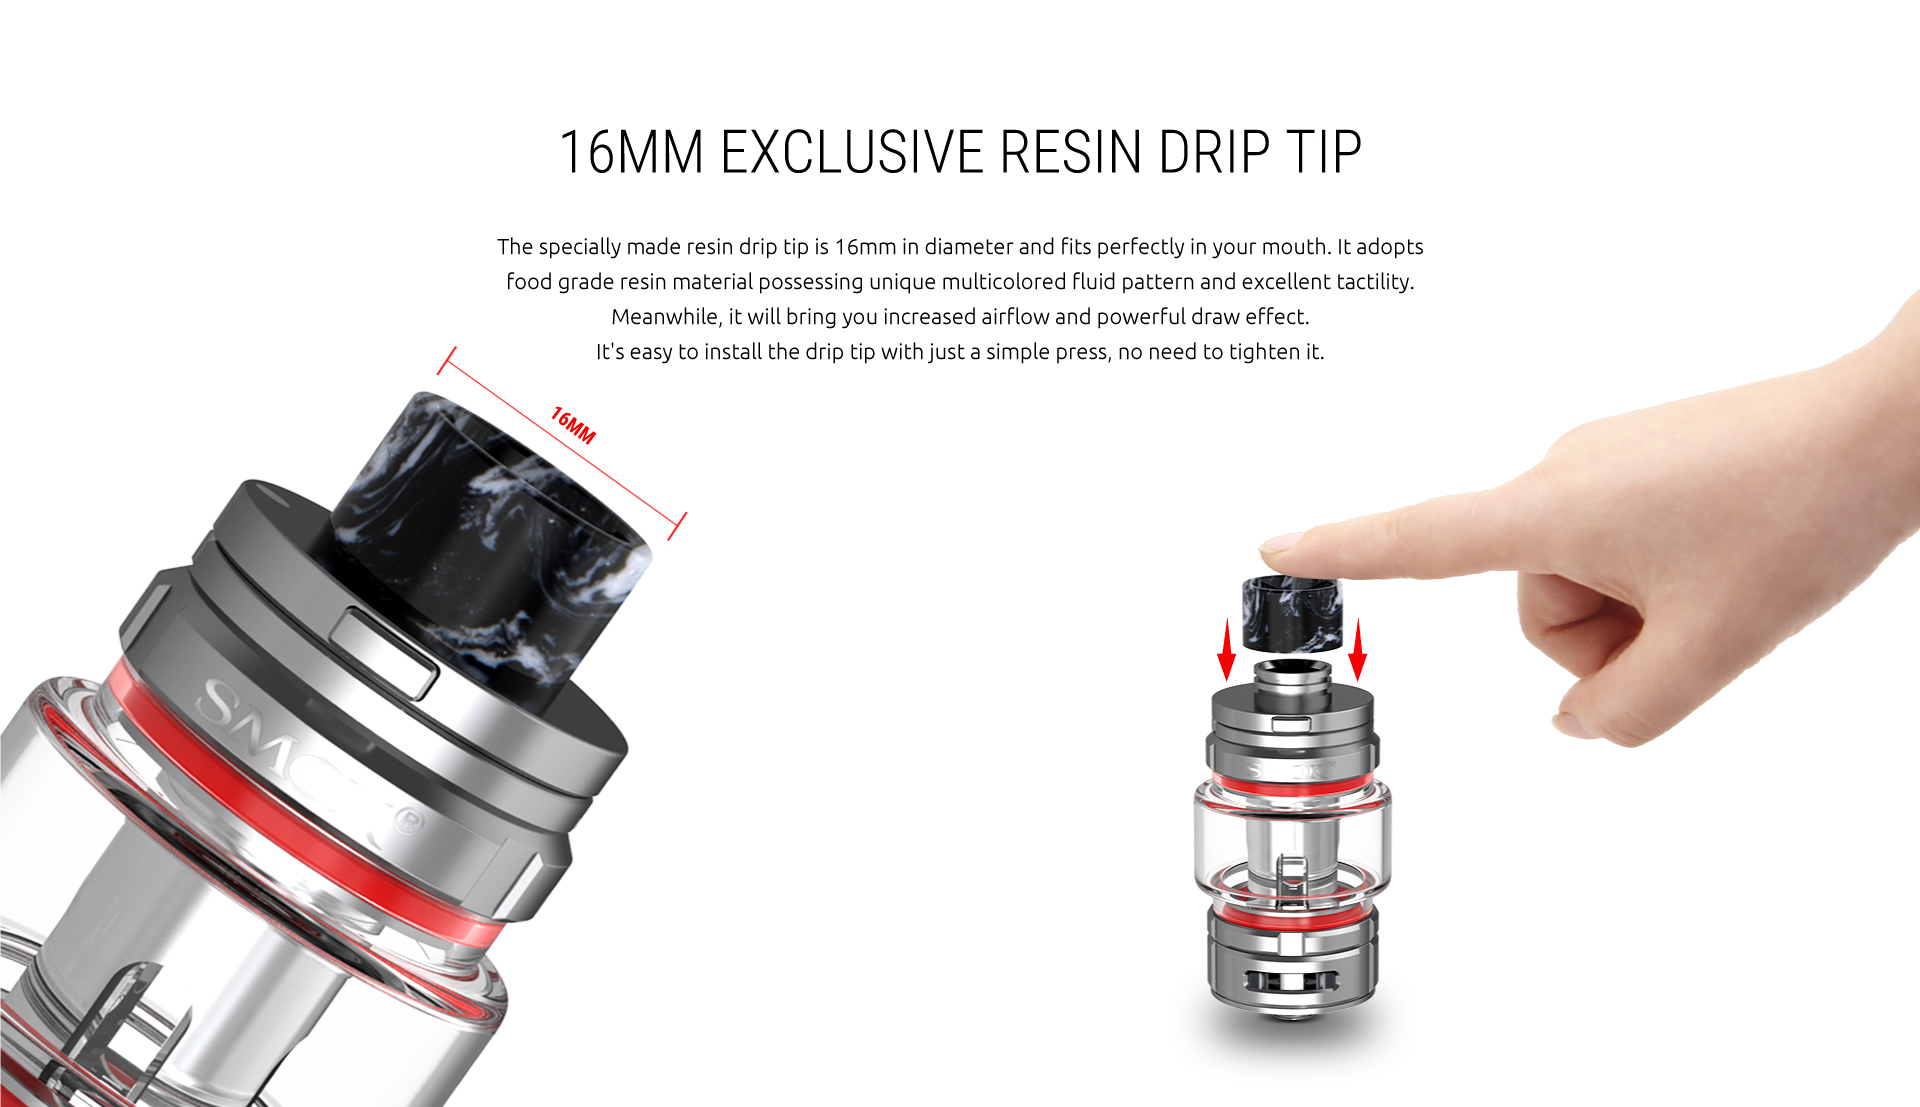 16mm Exclusive Resin Drip Tip for SMOK TFV16 Tank